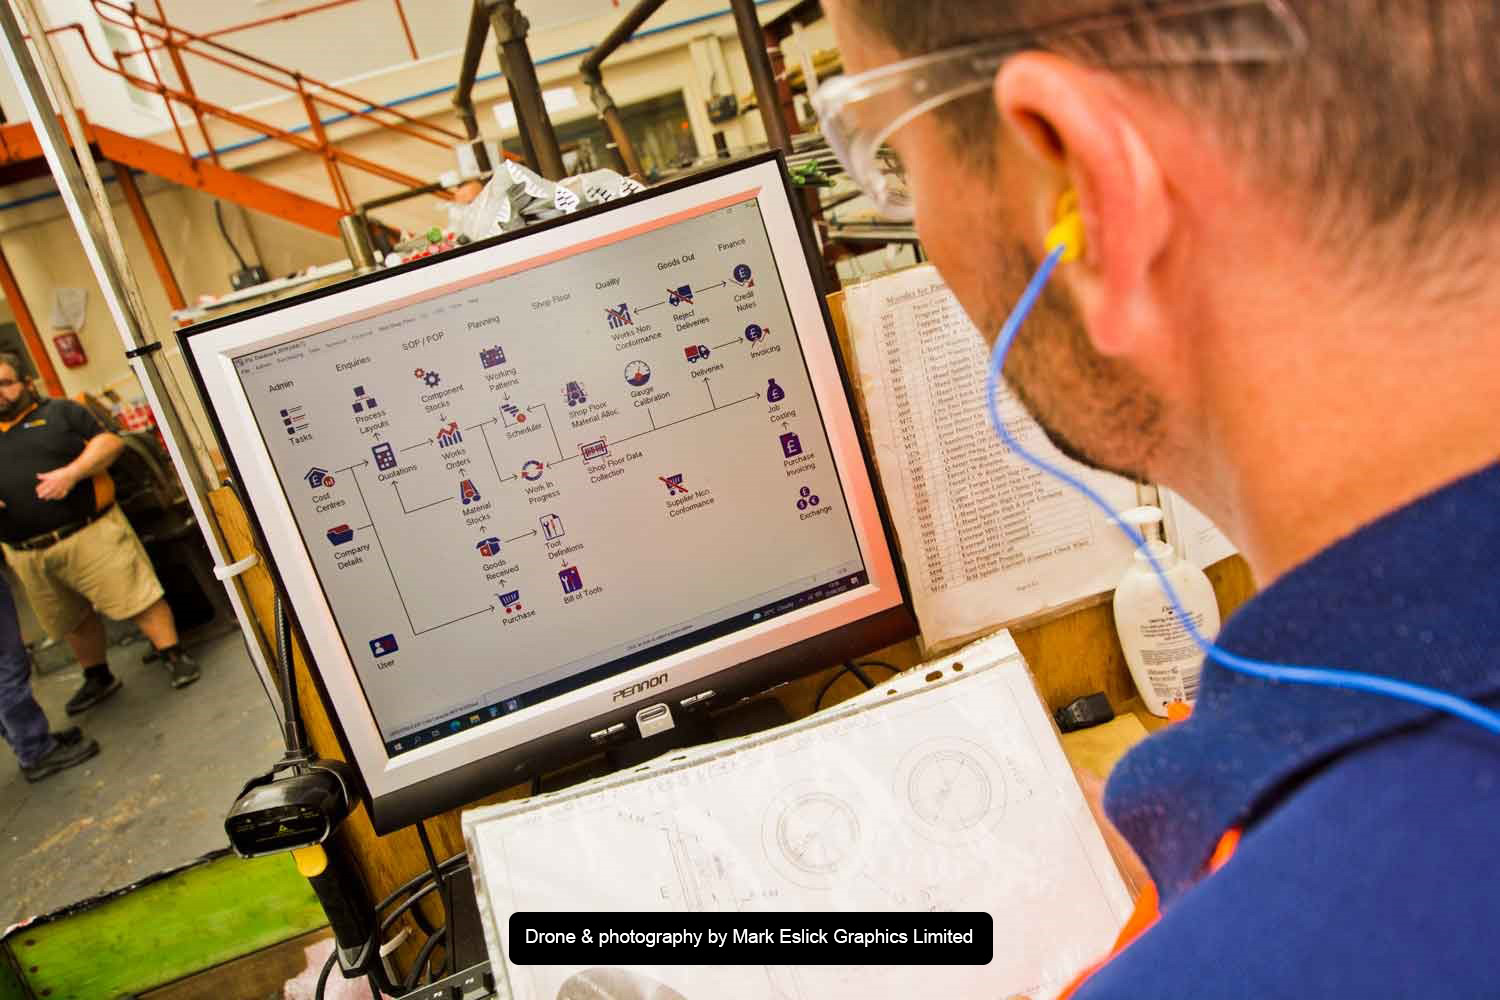 AW Engineering Reaps Benefits Of Production Control Software During Factory Move